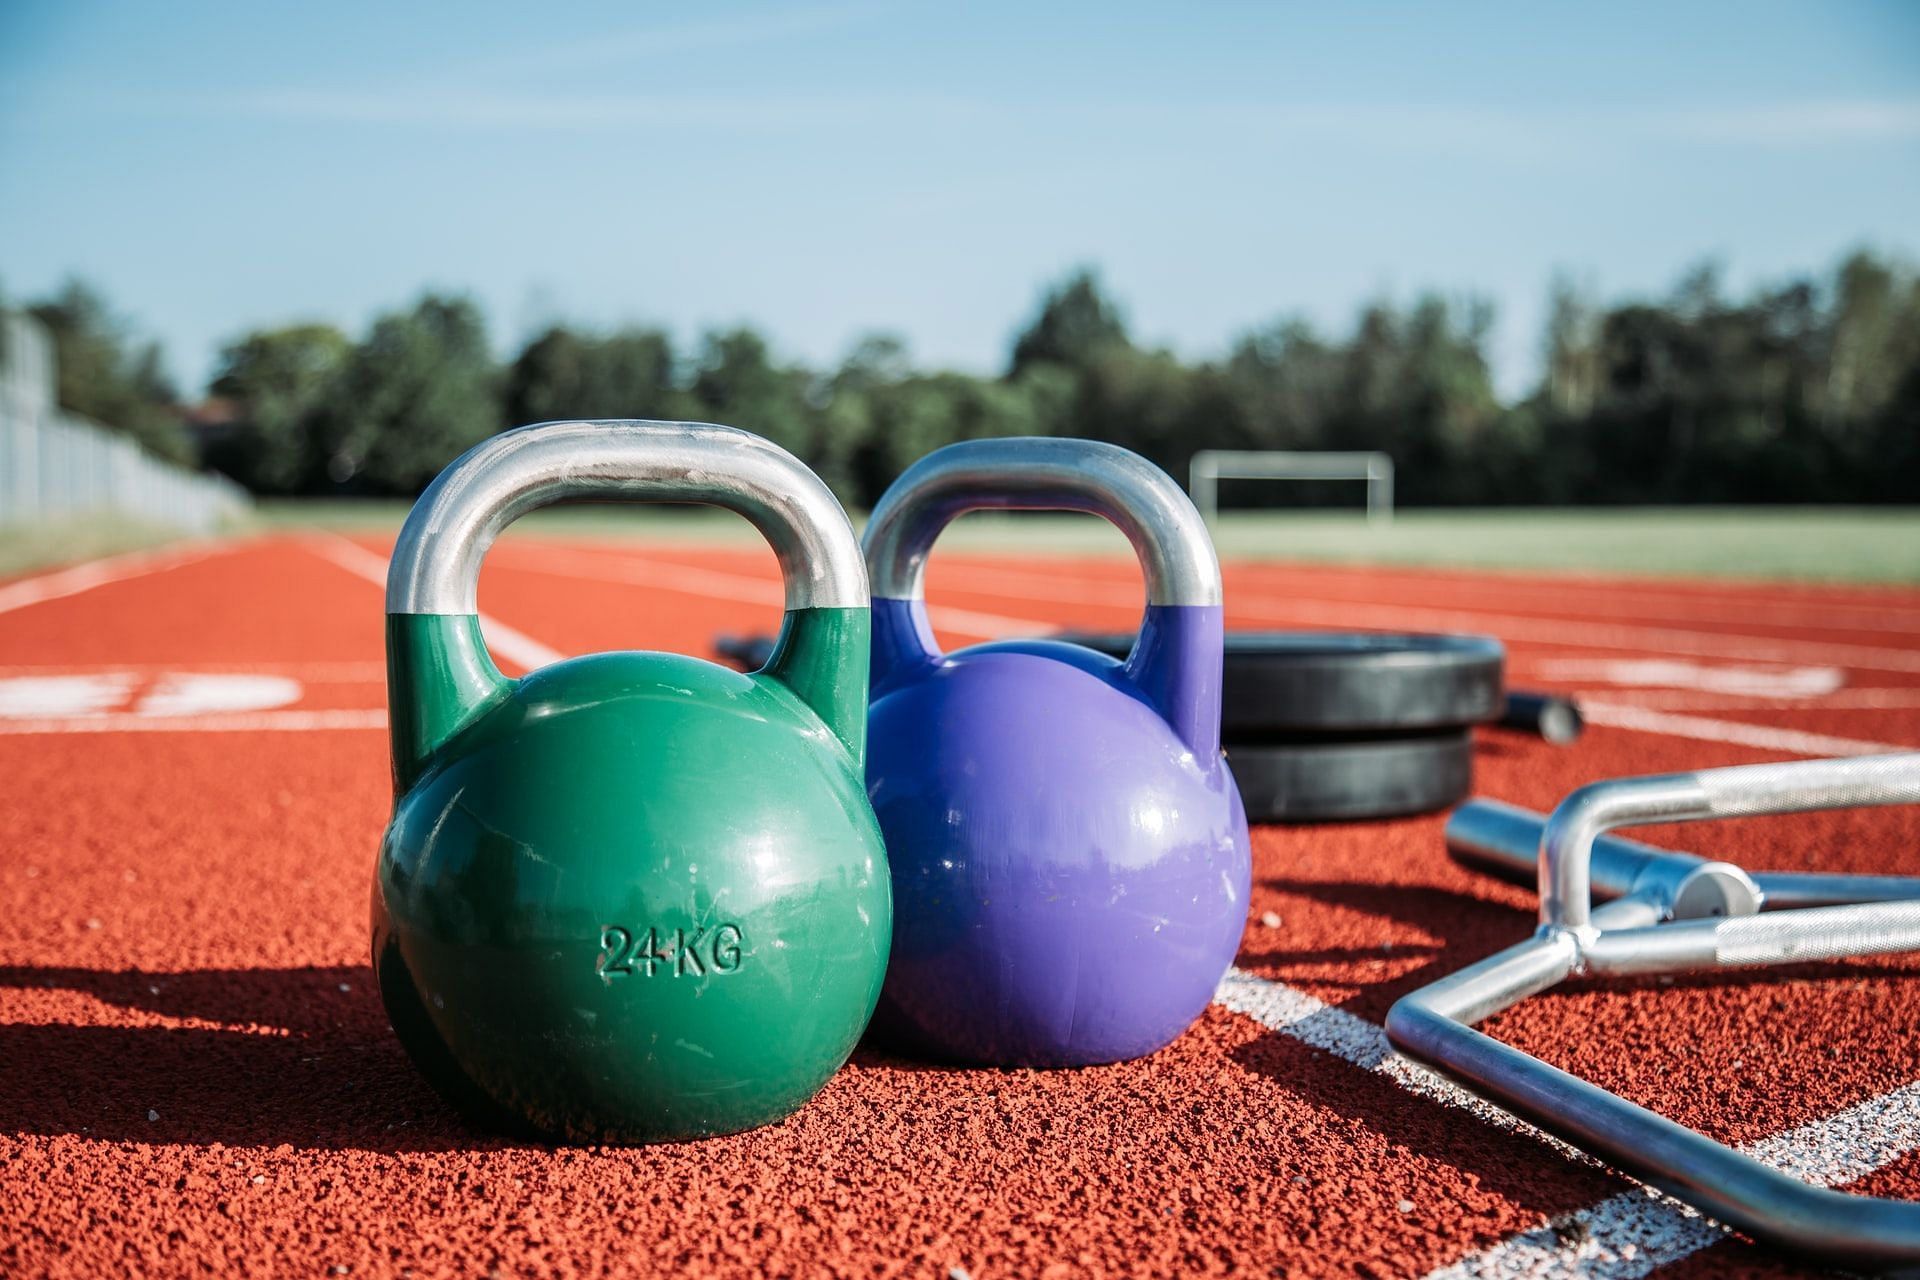 Kettlebell exercises give a lean and toned physique. (Photo by Alora Griffiths on Unsplash)